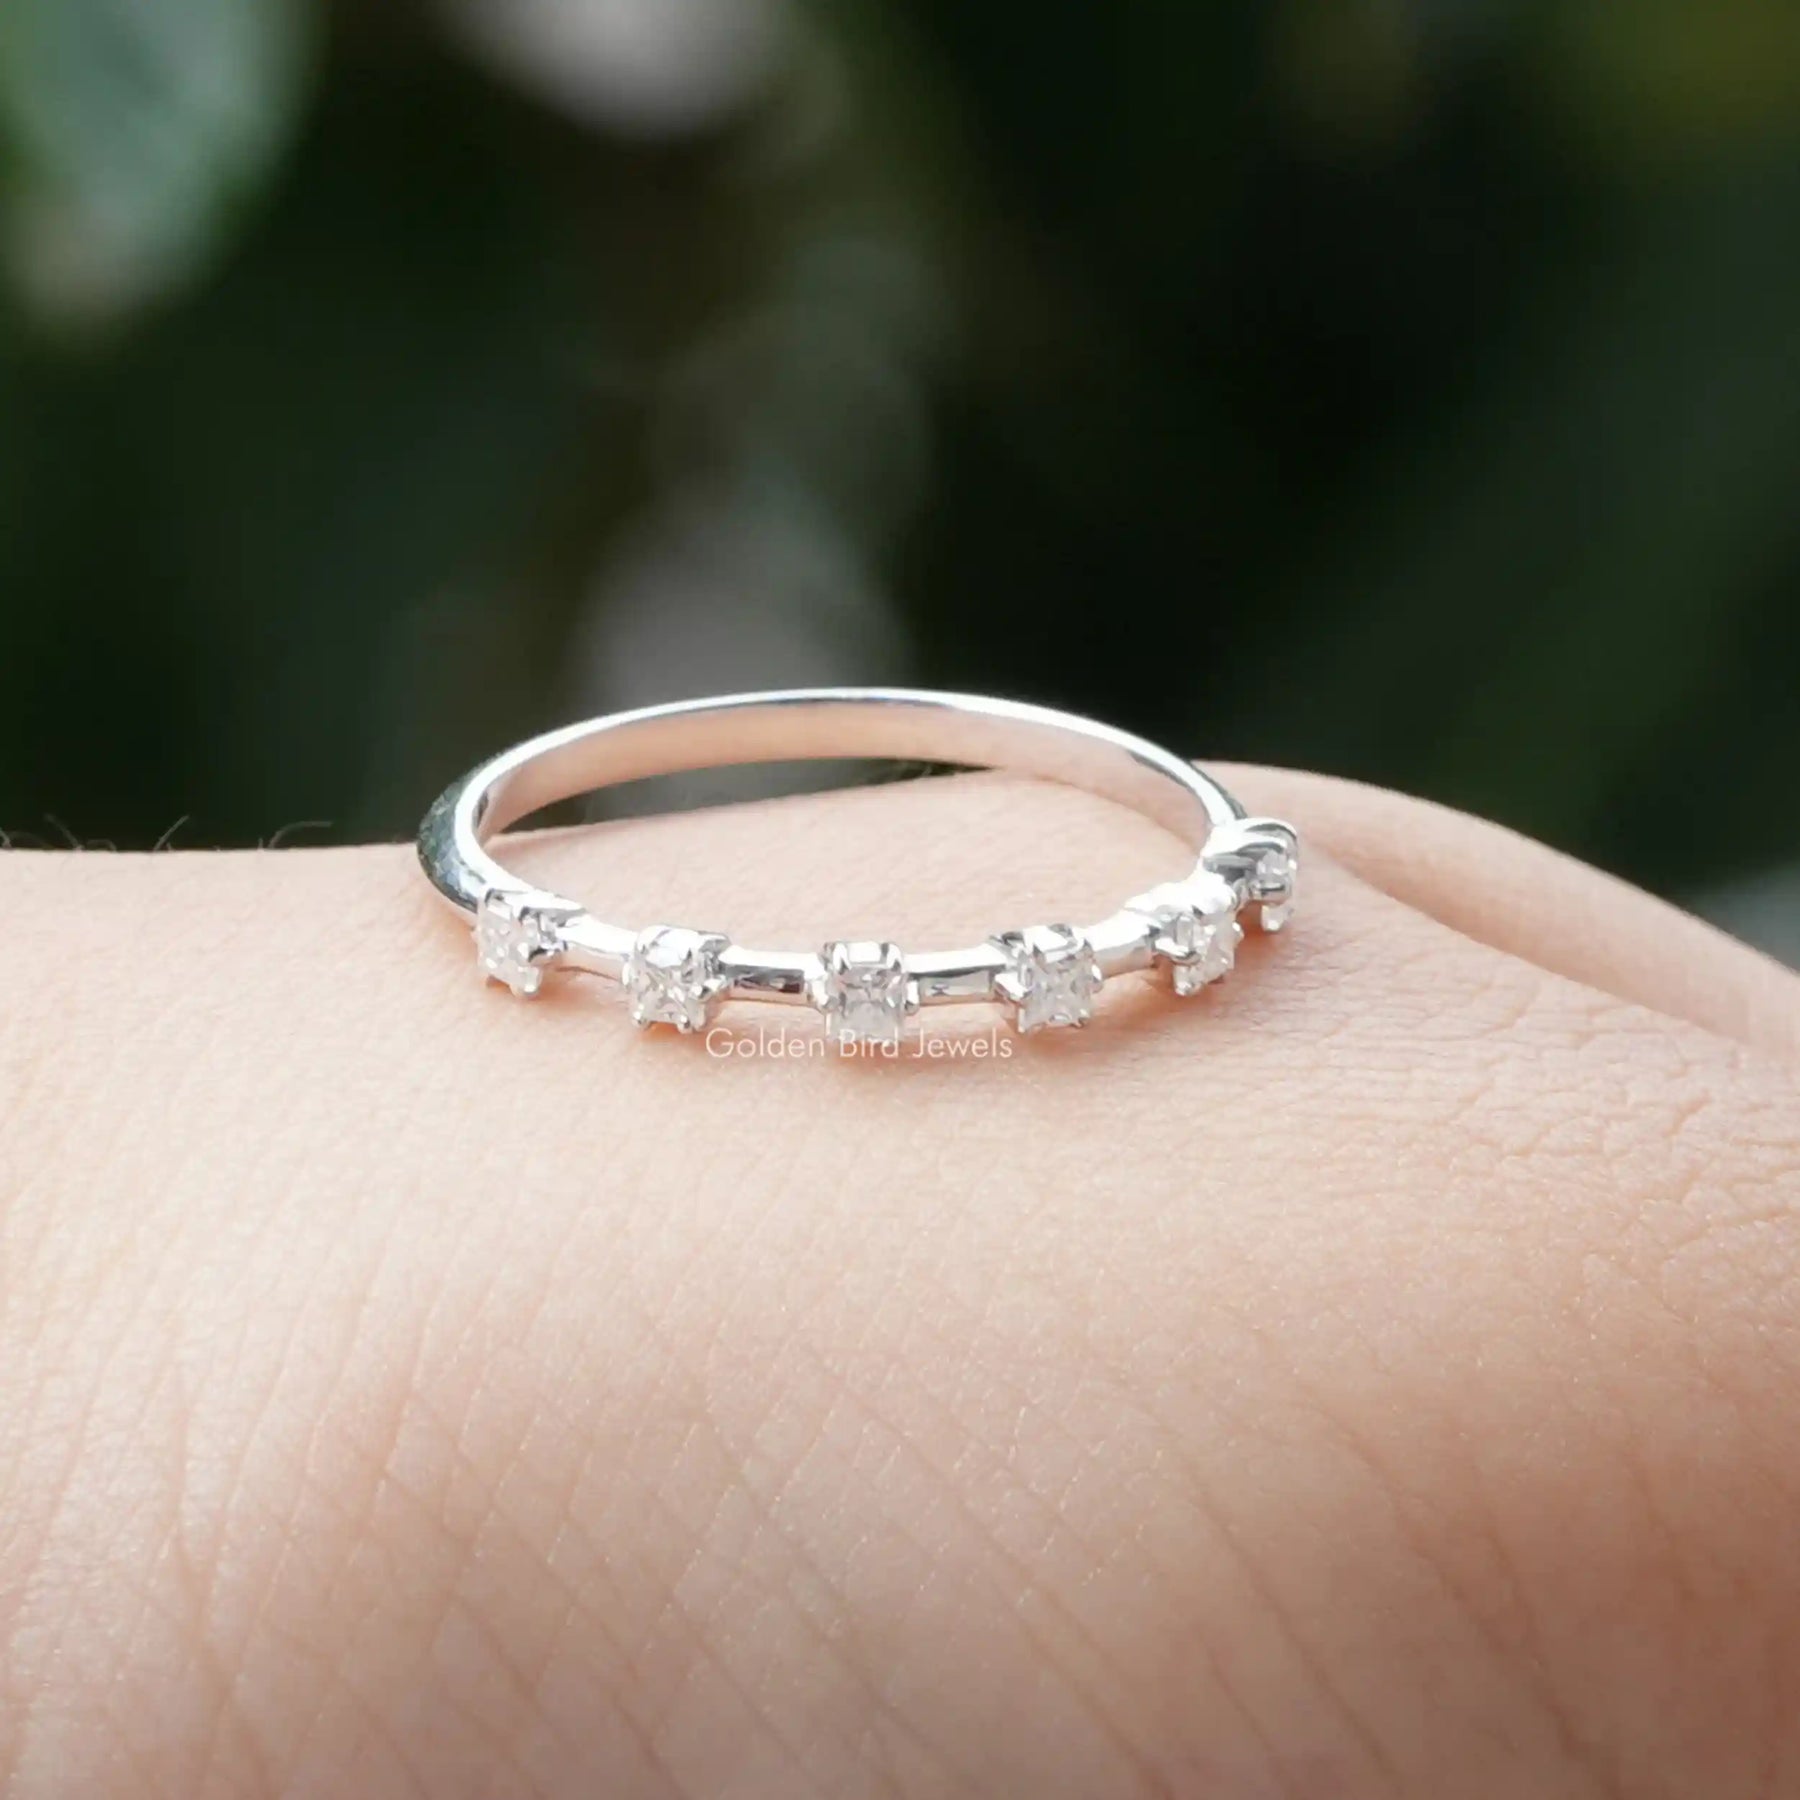 [This half eternity wedding band madeof princess cut stones and white gold]-[Golden Bird Jewels]